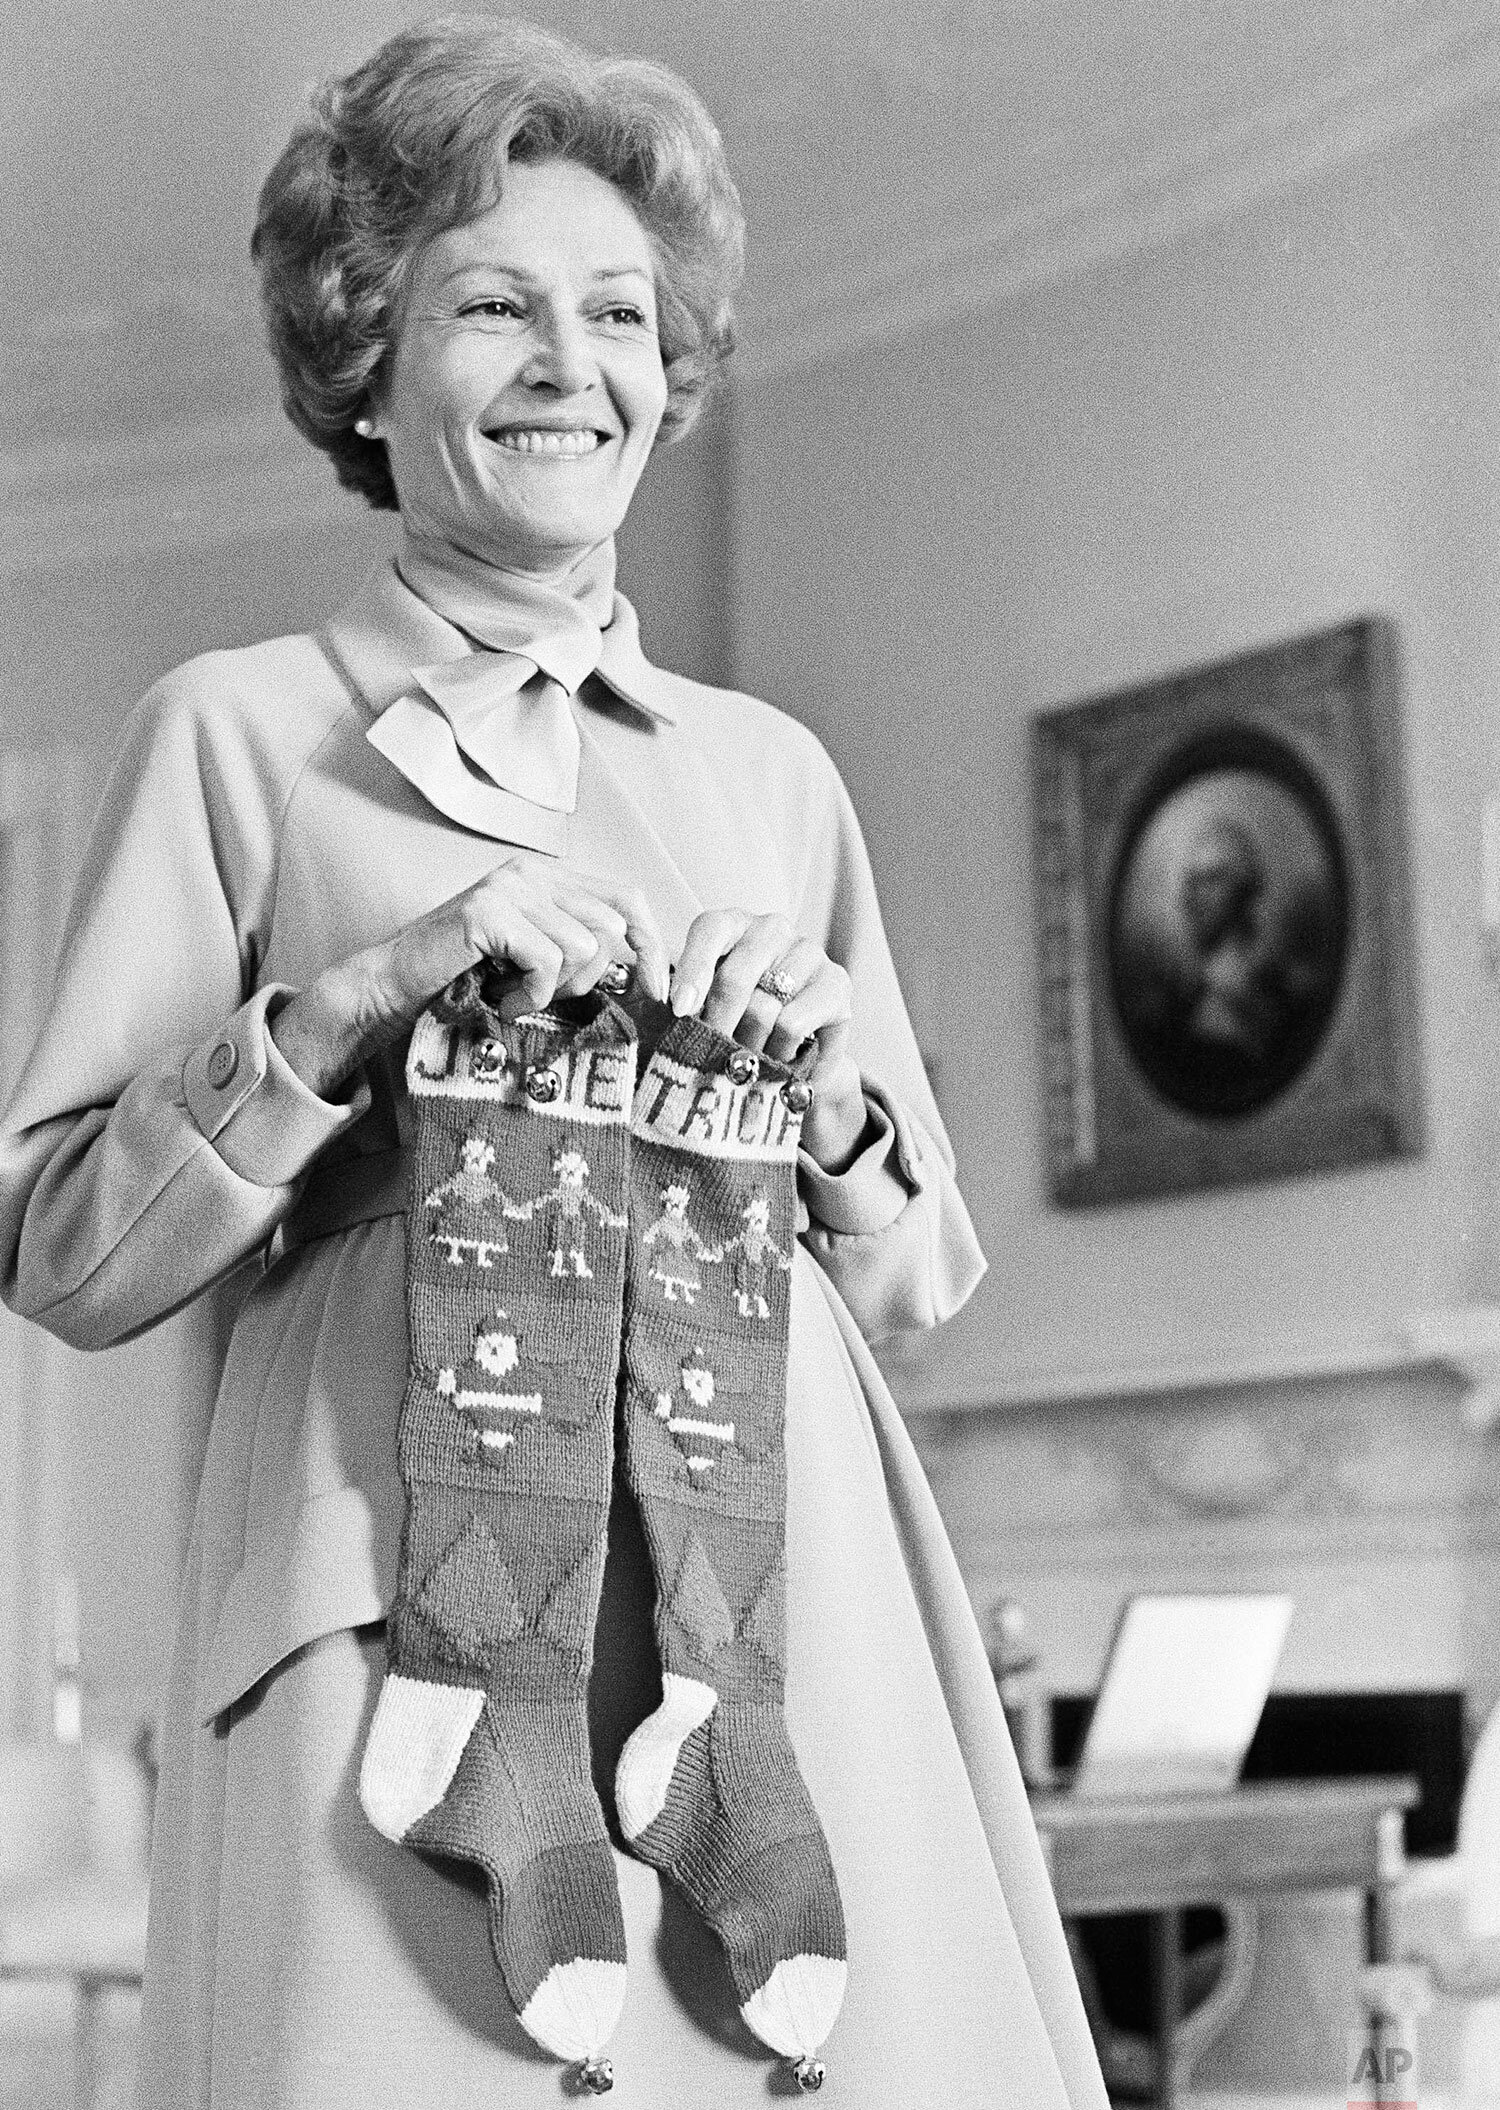  First lady Pat Nixon holds stockings carrying the names of daughters Julie and Tricia as she helps with pre-Christmas decorating at the White House in Washington, Dec. 6, 1969.  (AP Photo/Henry Burroughs) 